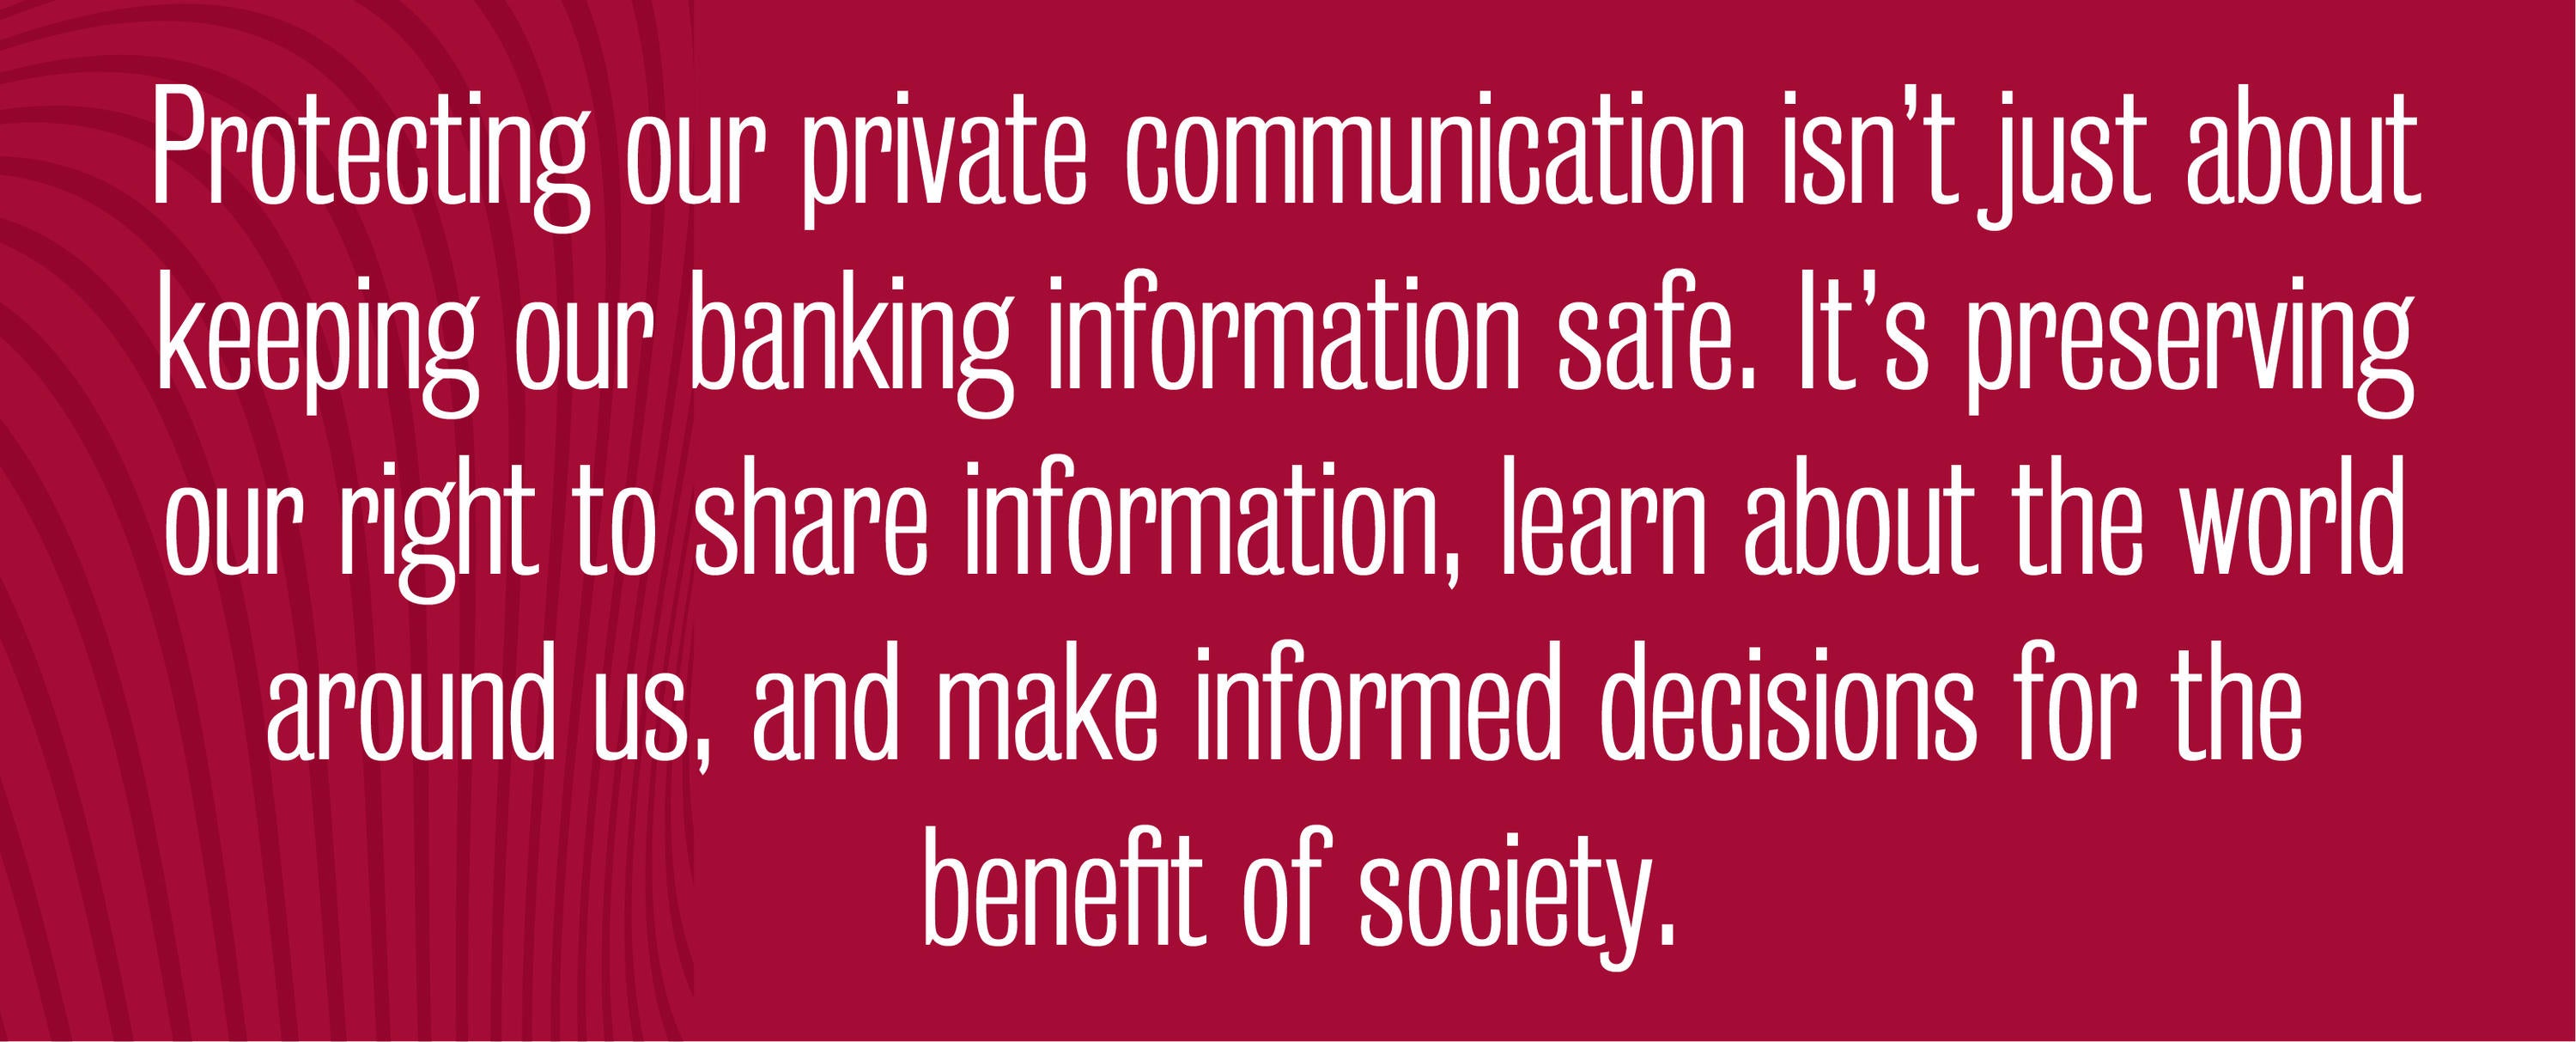 Quote - Protecting our private communication isn’t just about keeping our banking information safe. It’s preserving our right to share information, learn about the world around us, and make informed decisions for the benefit of society.